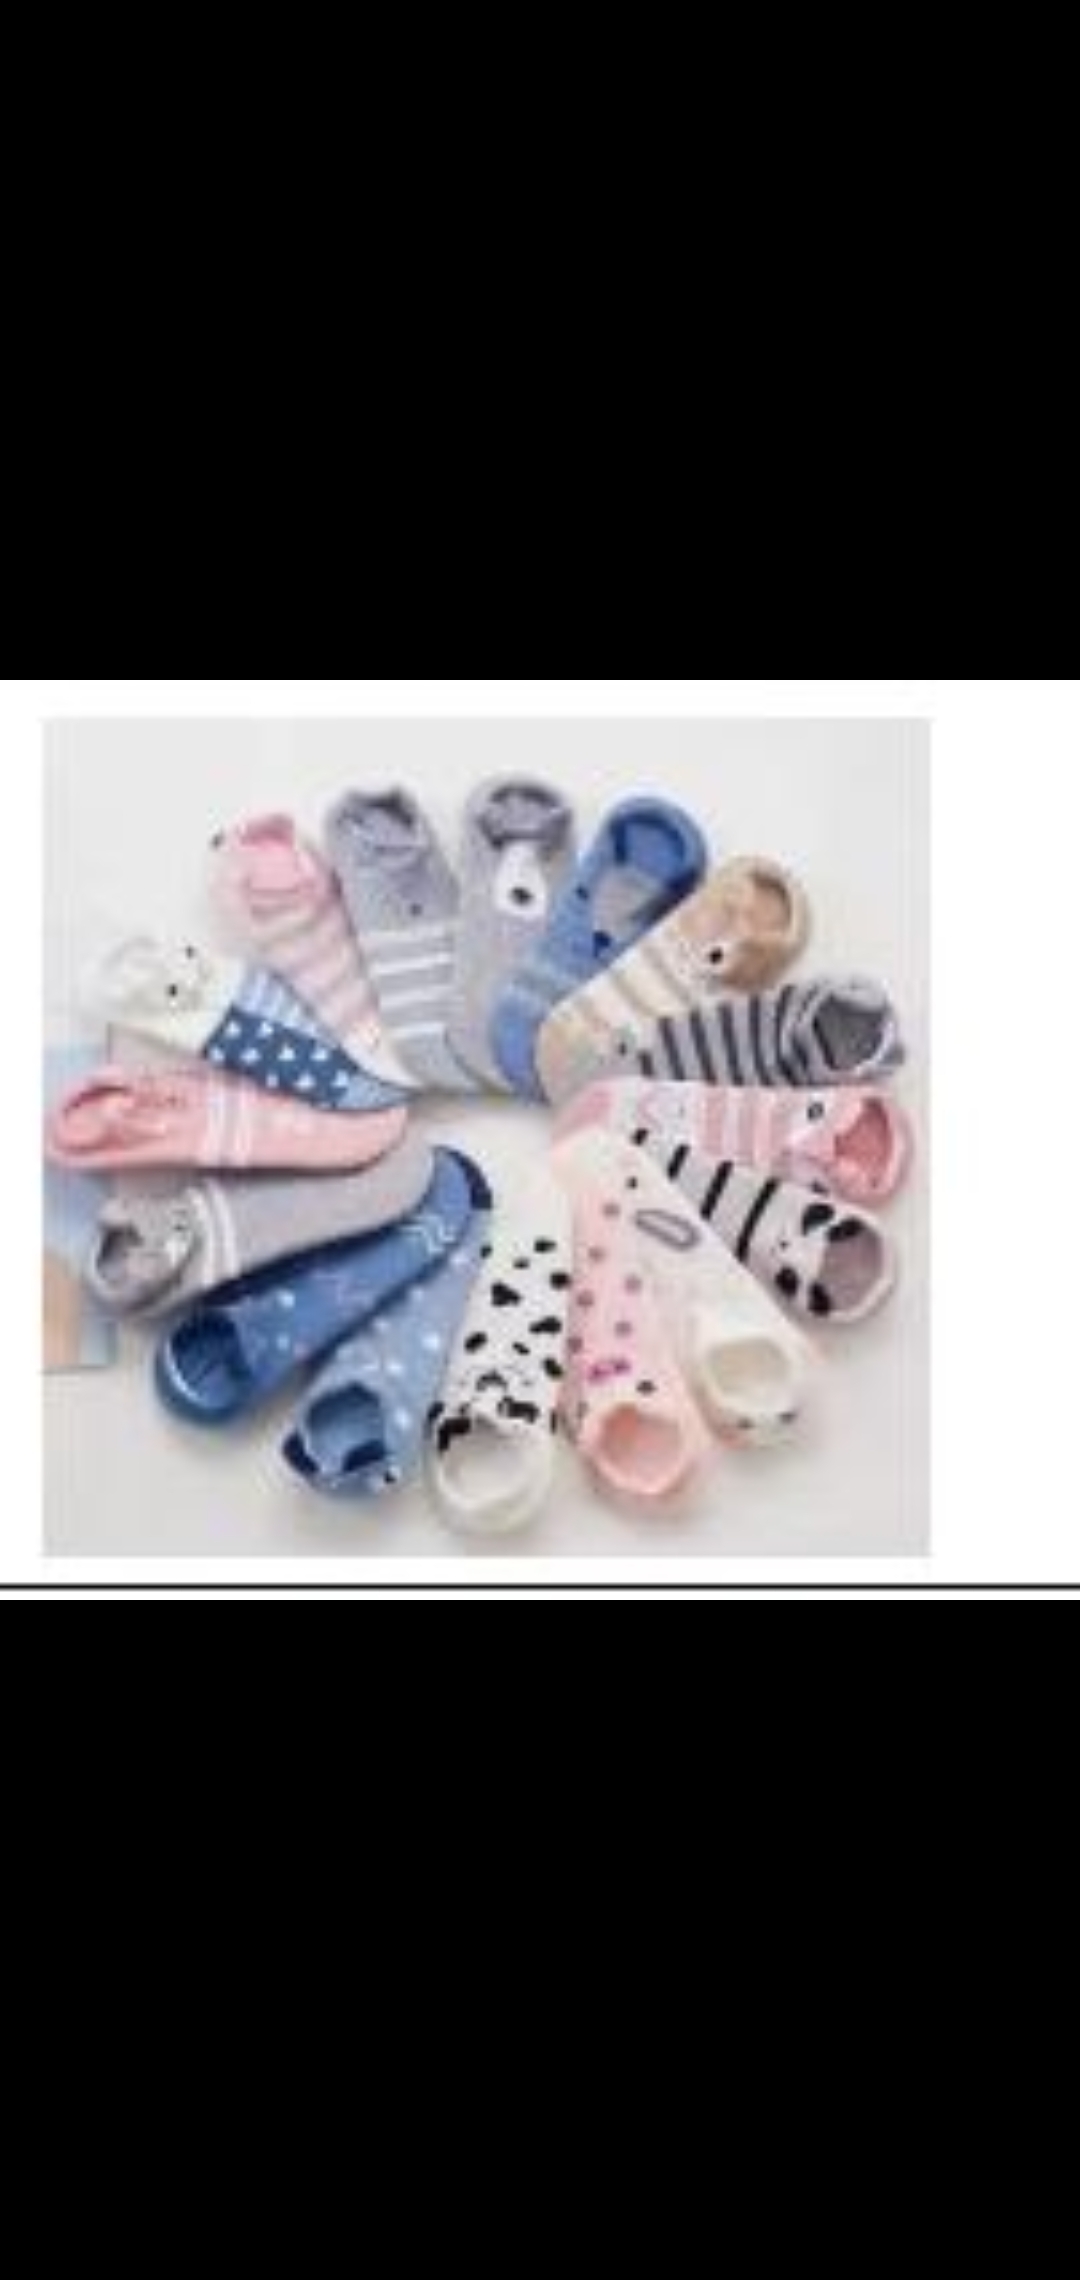   Spring and summer cotton socks